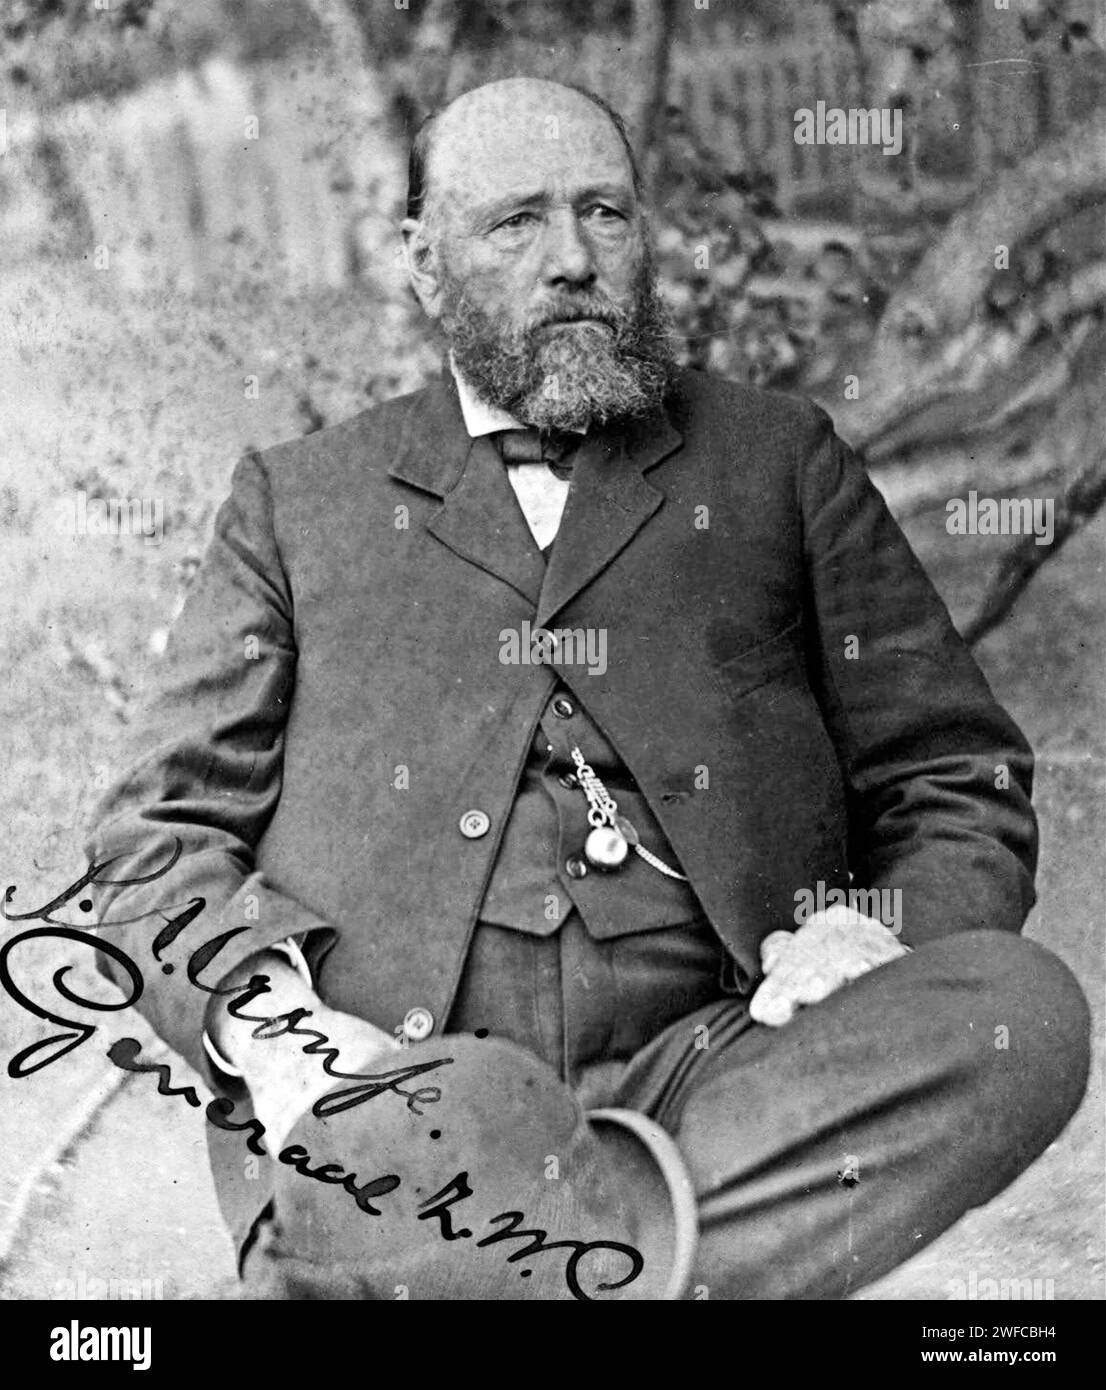 ANDRIES PETRUS CRONJÉ (1833-1916) Boer general in the Second Boer War, here about 1903. Stock Photo